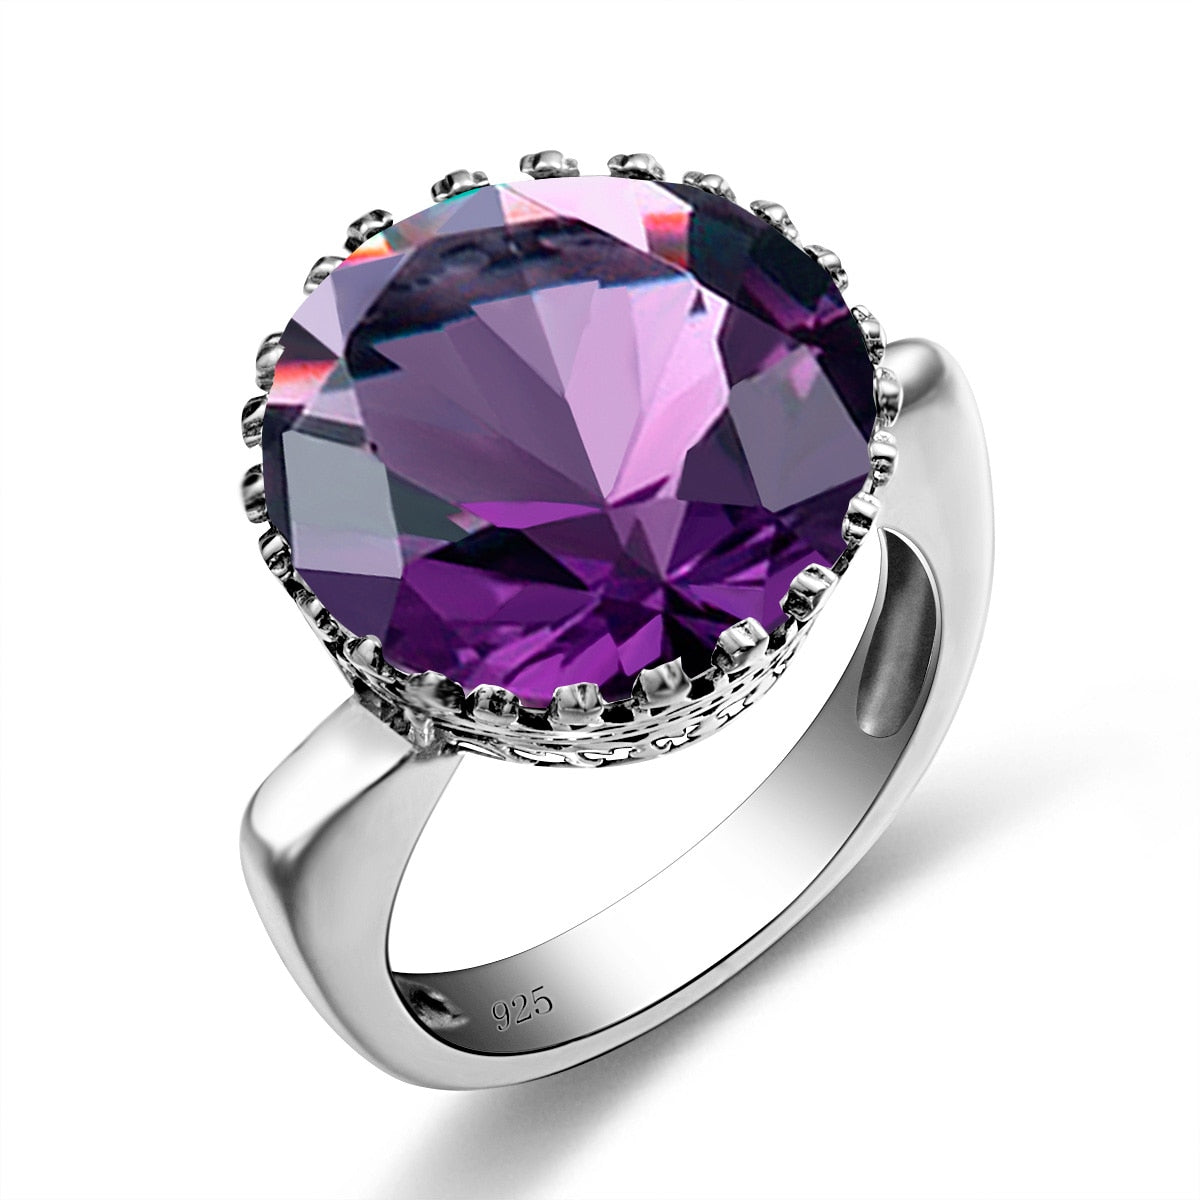 Szjinao Vintage 100% 925 Sterling Silver 15ct Round Created Aquamarine Ring For Women Famous Branded Handmade Fine Jewelery 2021 Amethyst